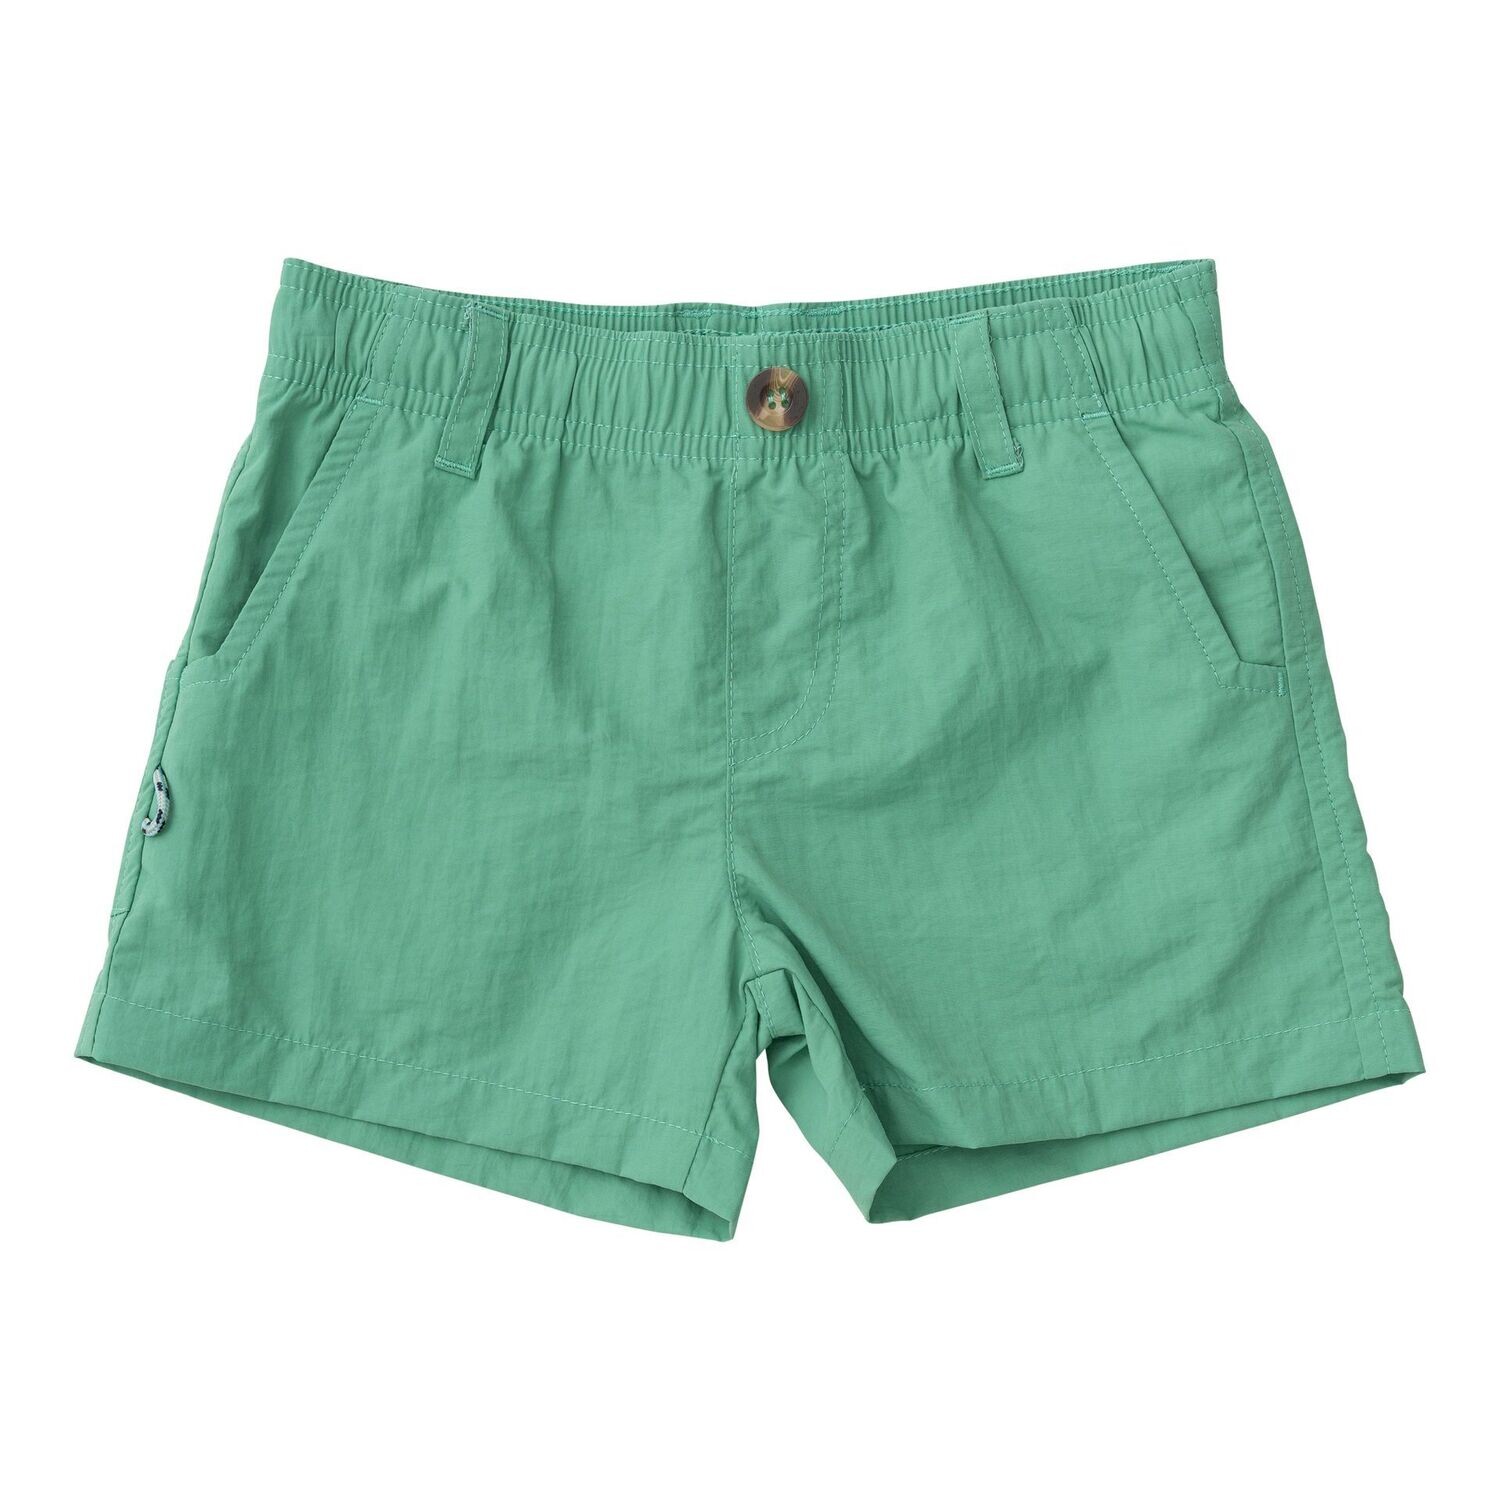 Outrigger Performance Short - Green Spruce, Size: 18m